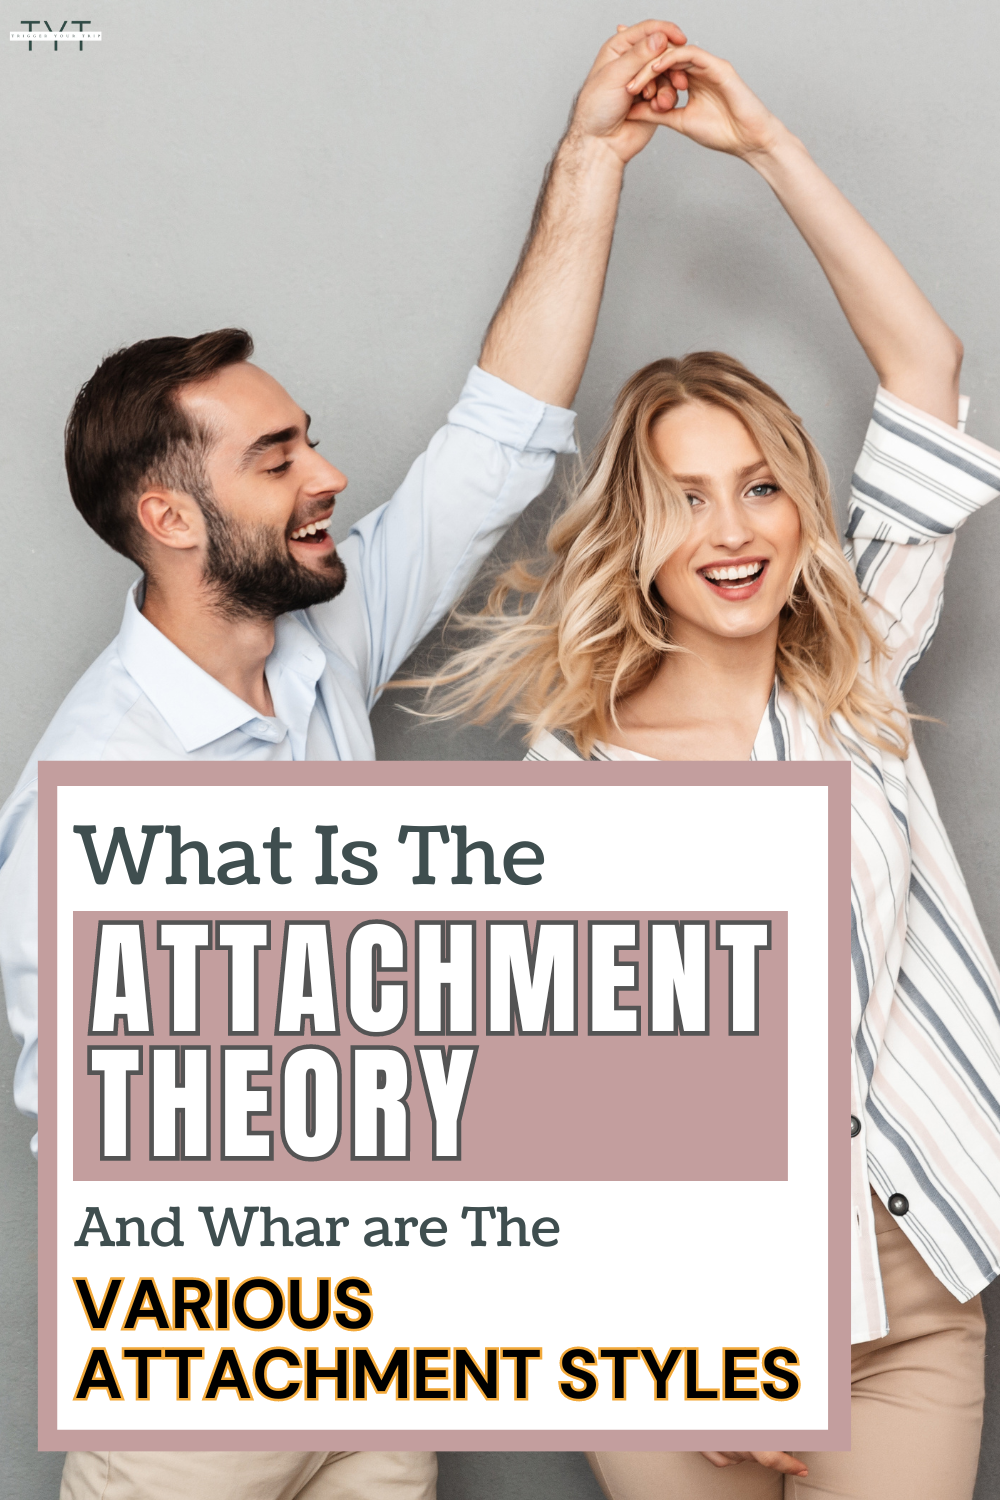 willing to understand your own attachment style learn about avoidant attachment, anxious attachment or secure attachment styles